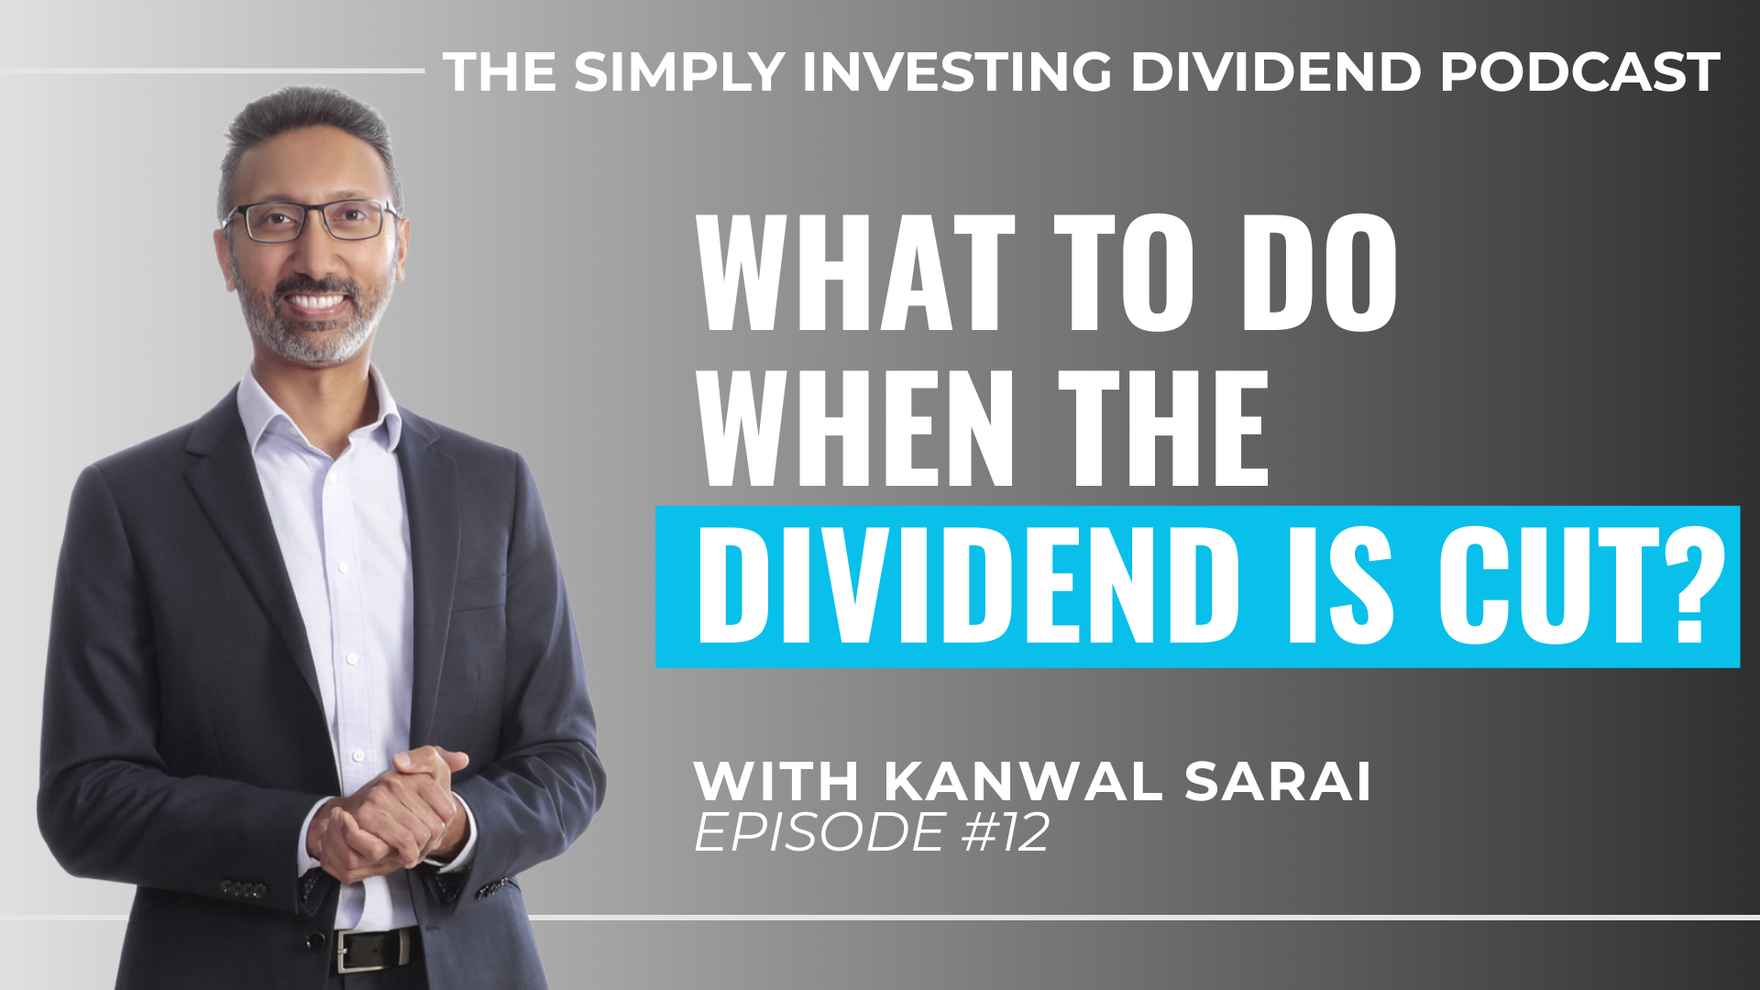 Simply Investing Dividend Podcast Episode 12 - What to Do When the Dividend is Cut